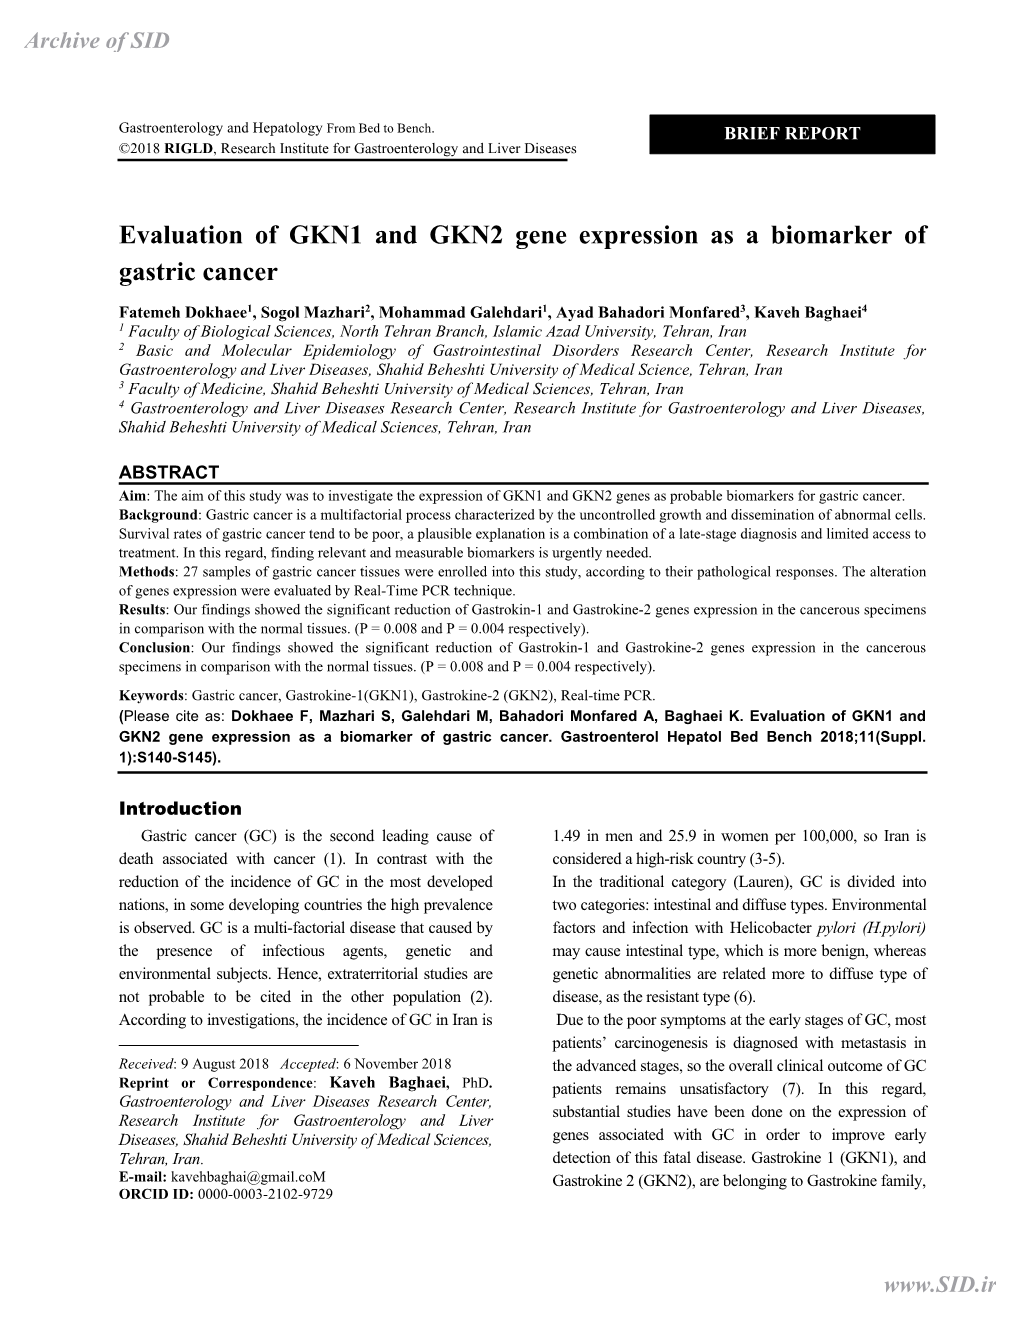 Evaluation of GKN1 and GKN2 Gene Expression As a Biomarker of Gastric Cancer